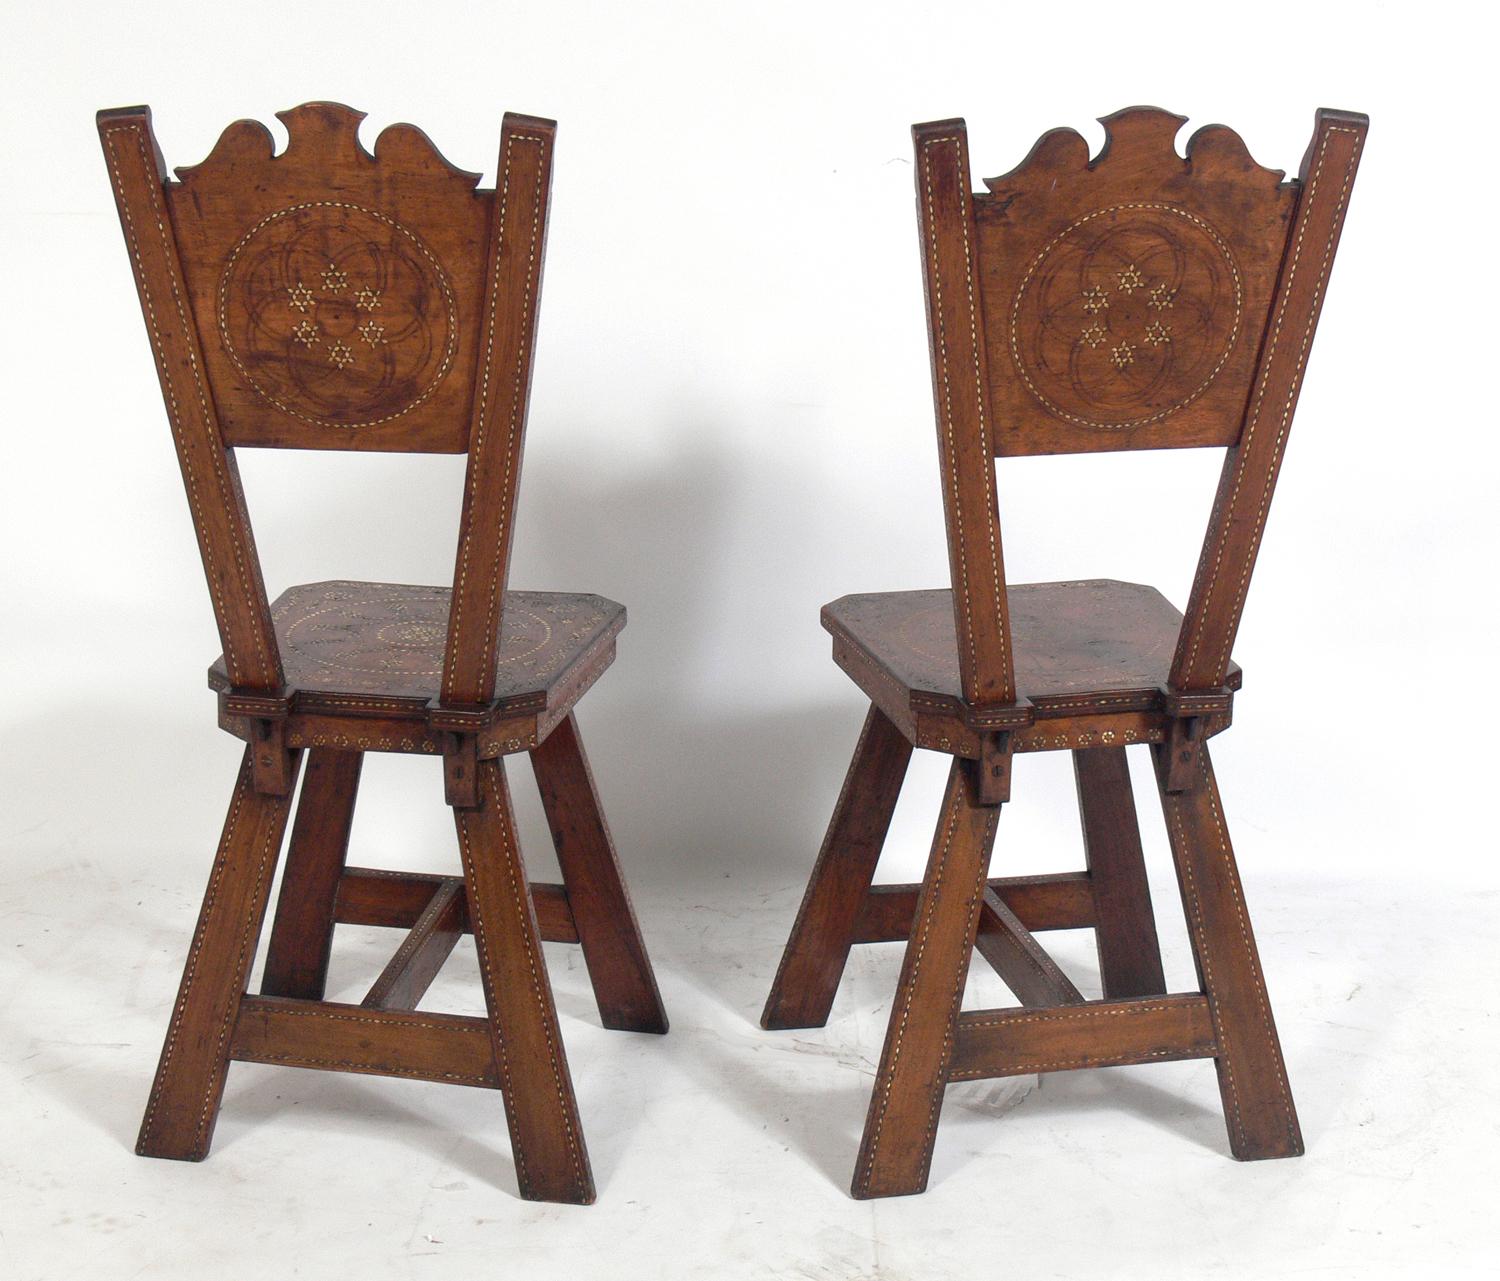 Bohemian Pair of Inlaid Moroccan Chairs